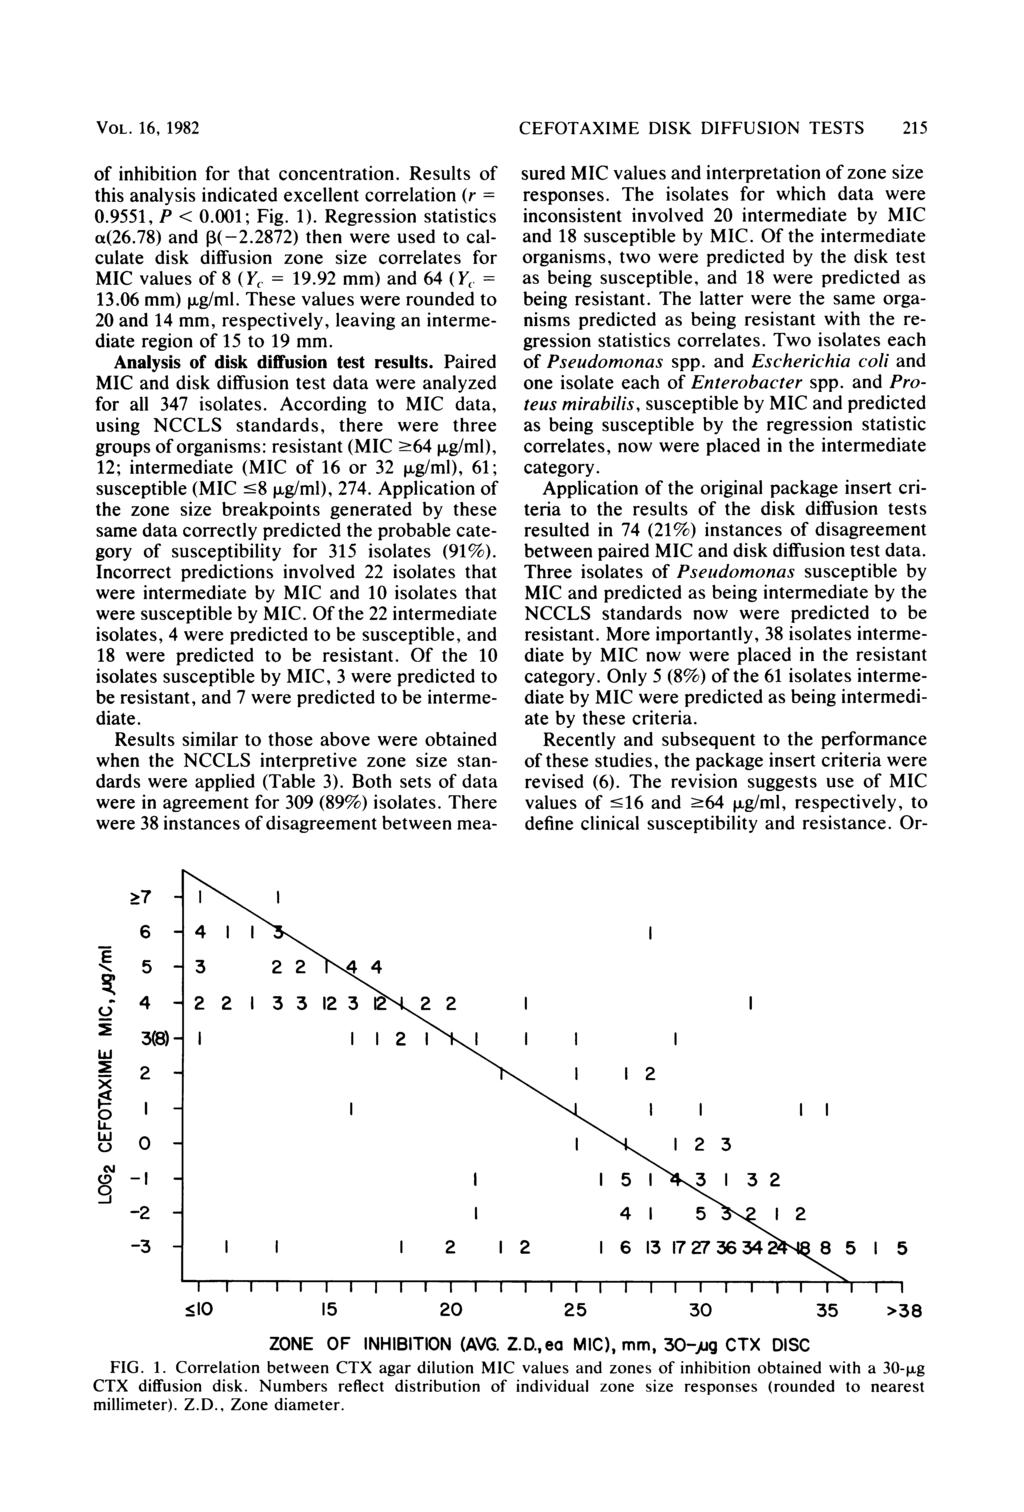 VOL. 16, 1982 CEFOTAXIME DISK DIFFUSION TESTS 215 of inhibition for that concentration. Results of this analysis indicated excellent correlation (r = 0.9551, P < 0.001; Fig. 1).